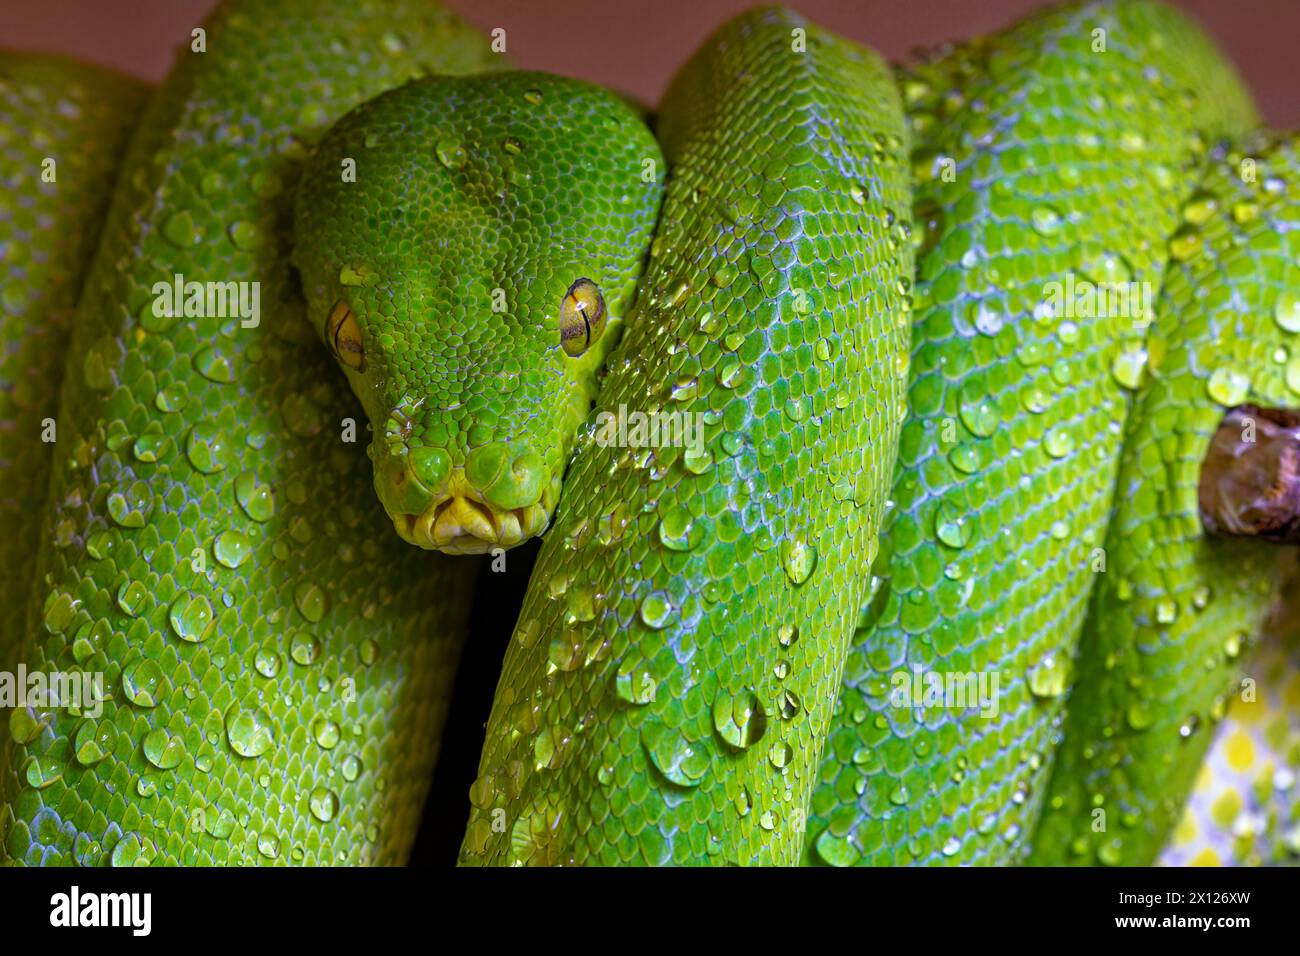 Portrait of ‘Lime’, a Manokwari Green Tree Python Curled on a Branch With Water Droplets, Which it Drinks from Its Body. Stock Photo